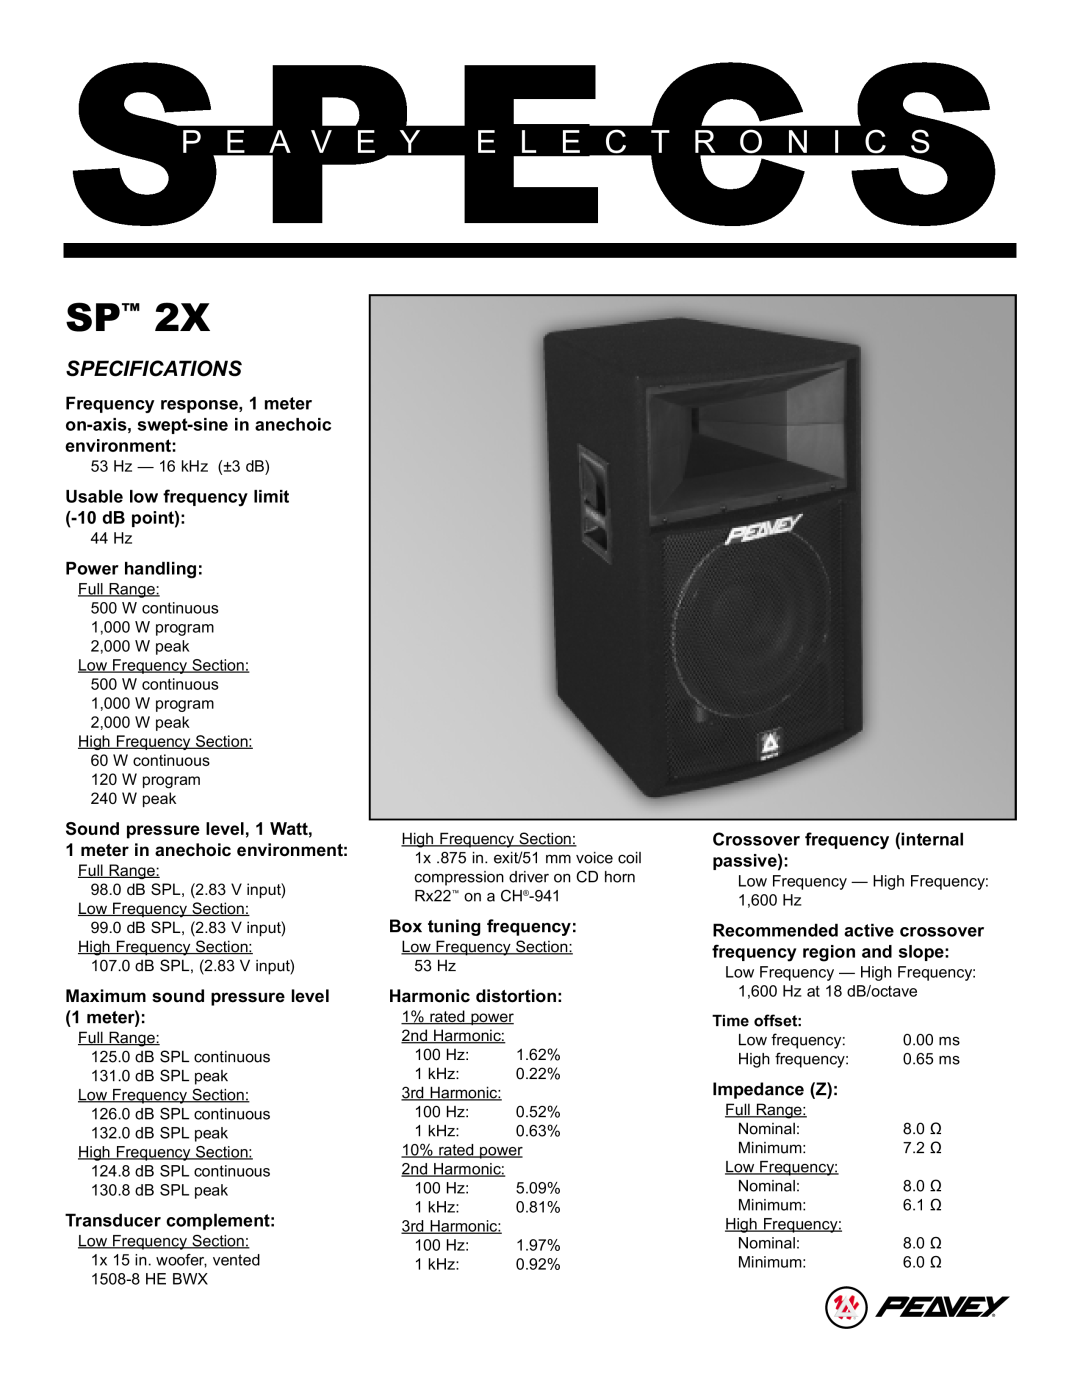 Peavey SP 2X specifications Specifications 